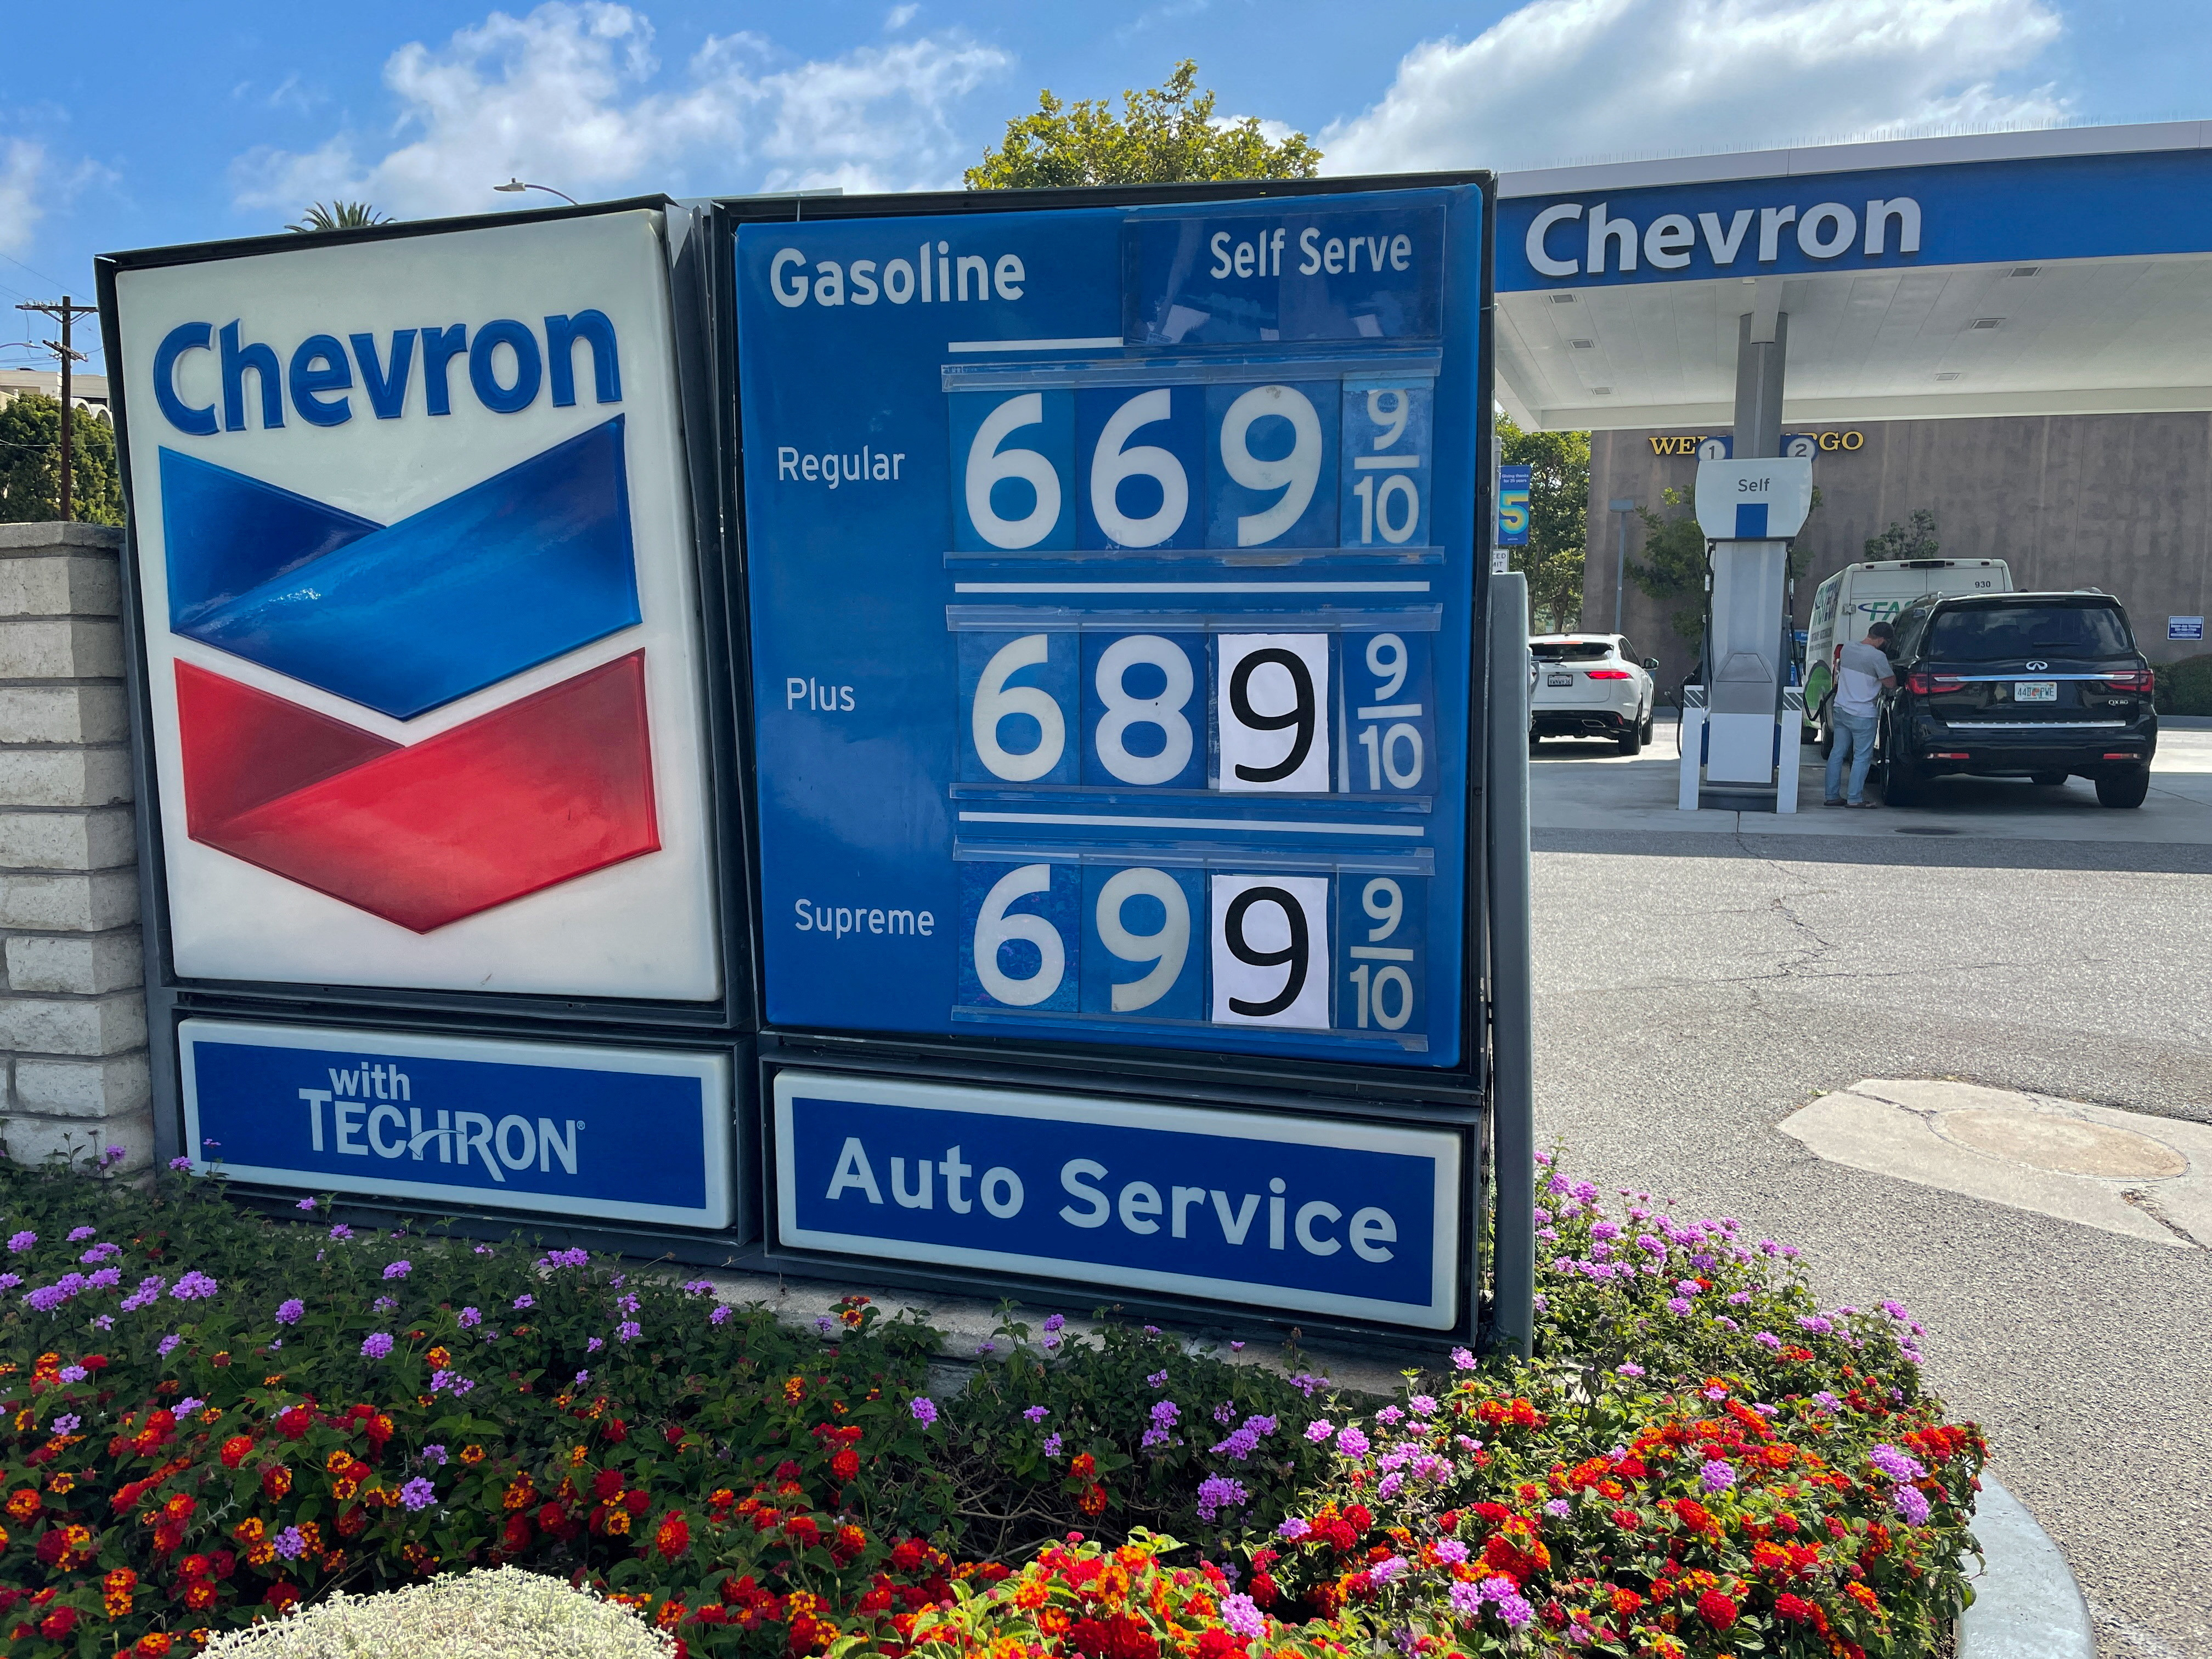 Gasoline prices are posted at a Chevron station as rising inflation and oil costs hit consumers in Los Angeles, California, US, June 13, 2022. REUTERS/Lucy Nicholson